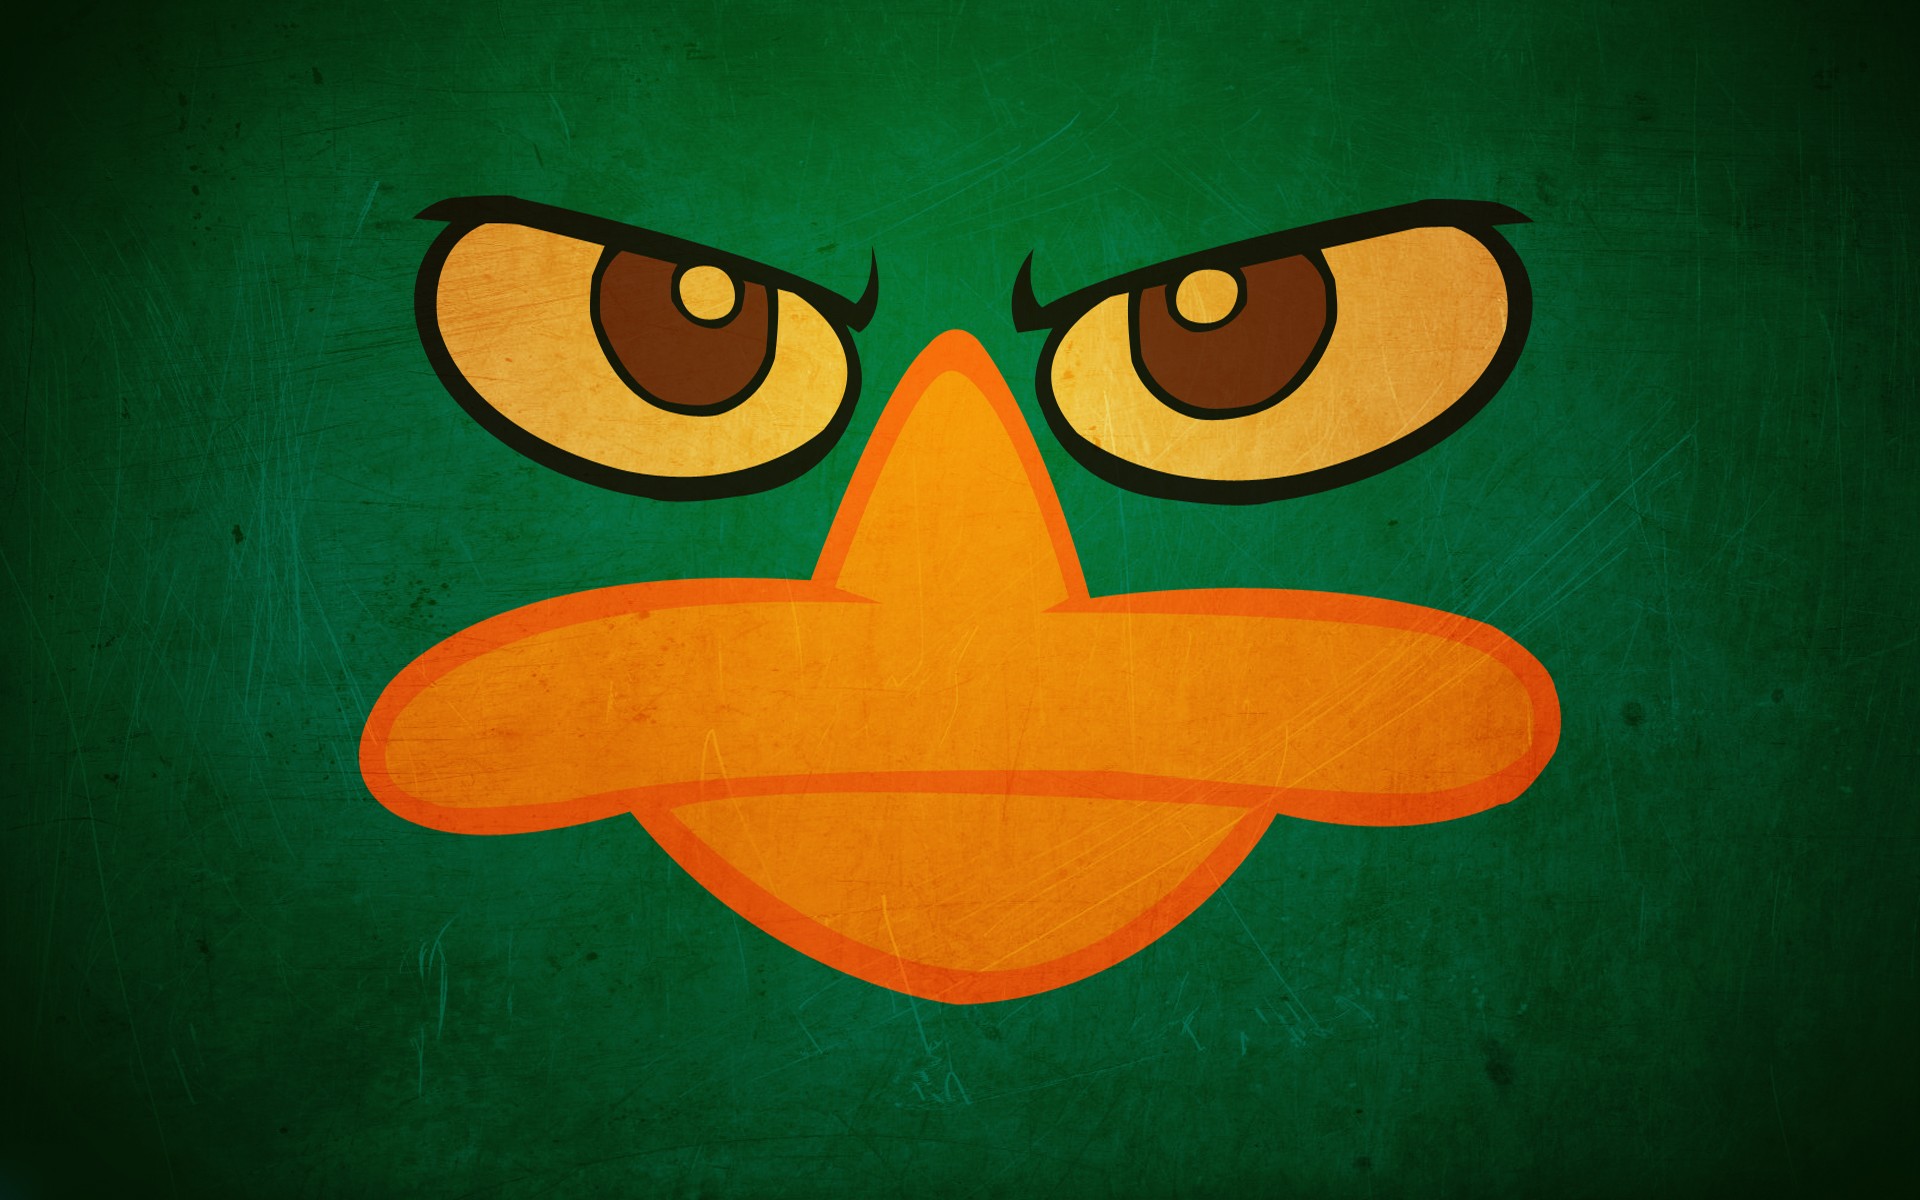 Perry The Platypus Wallpaper CoLK 28365 Hd Pictures Top Gallery